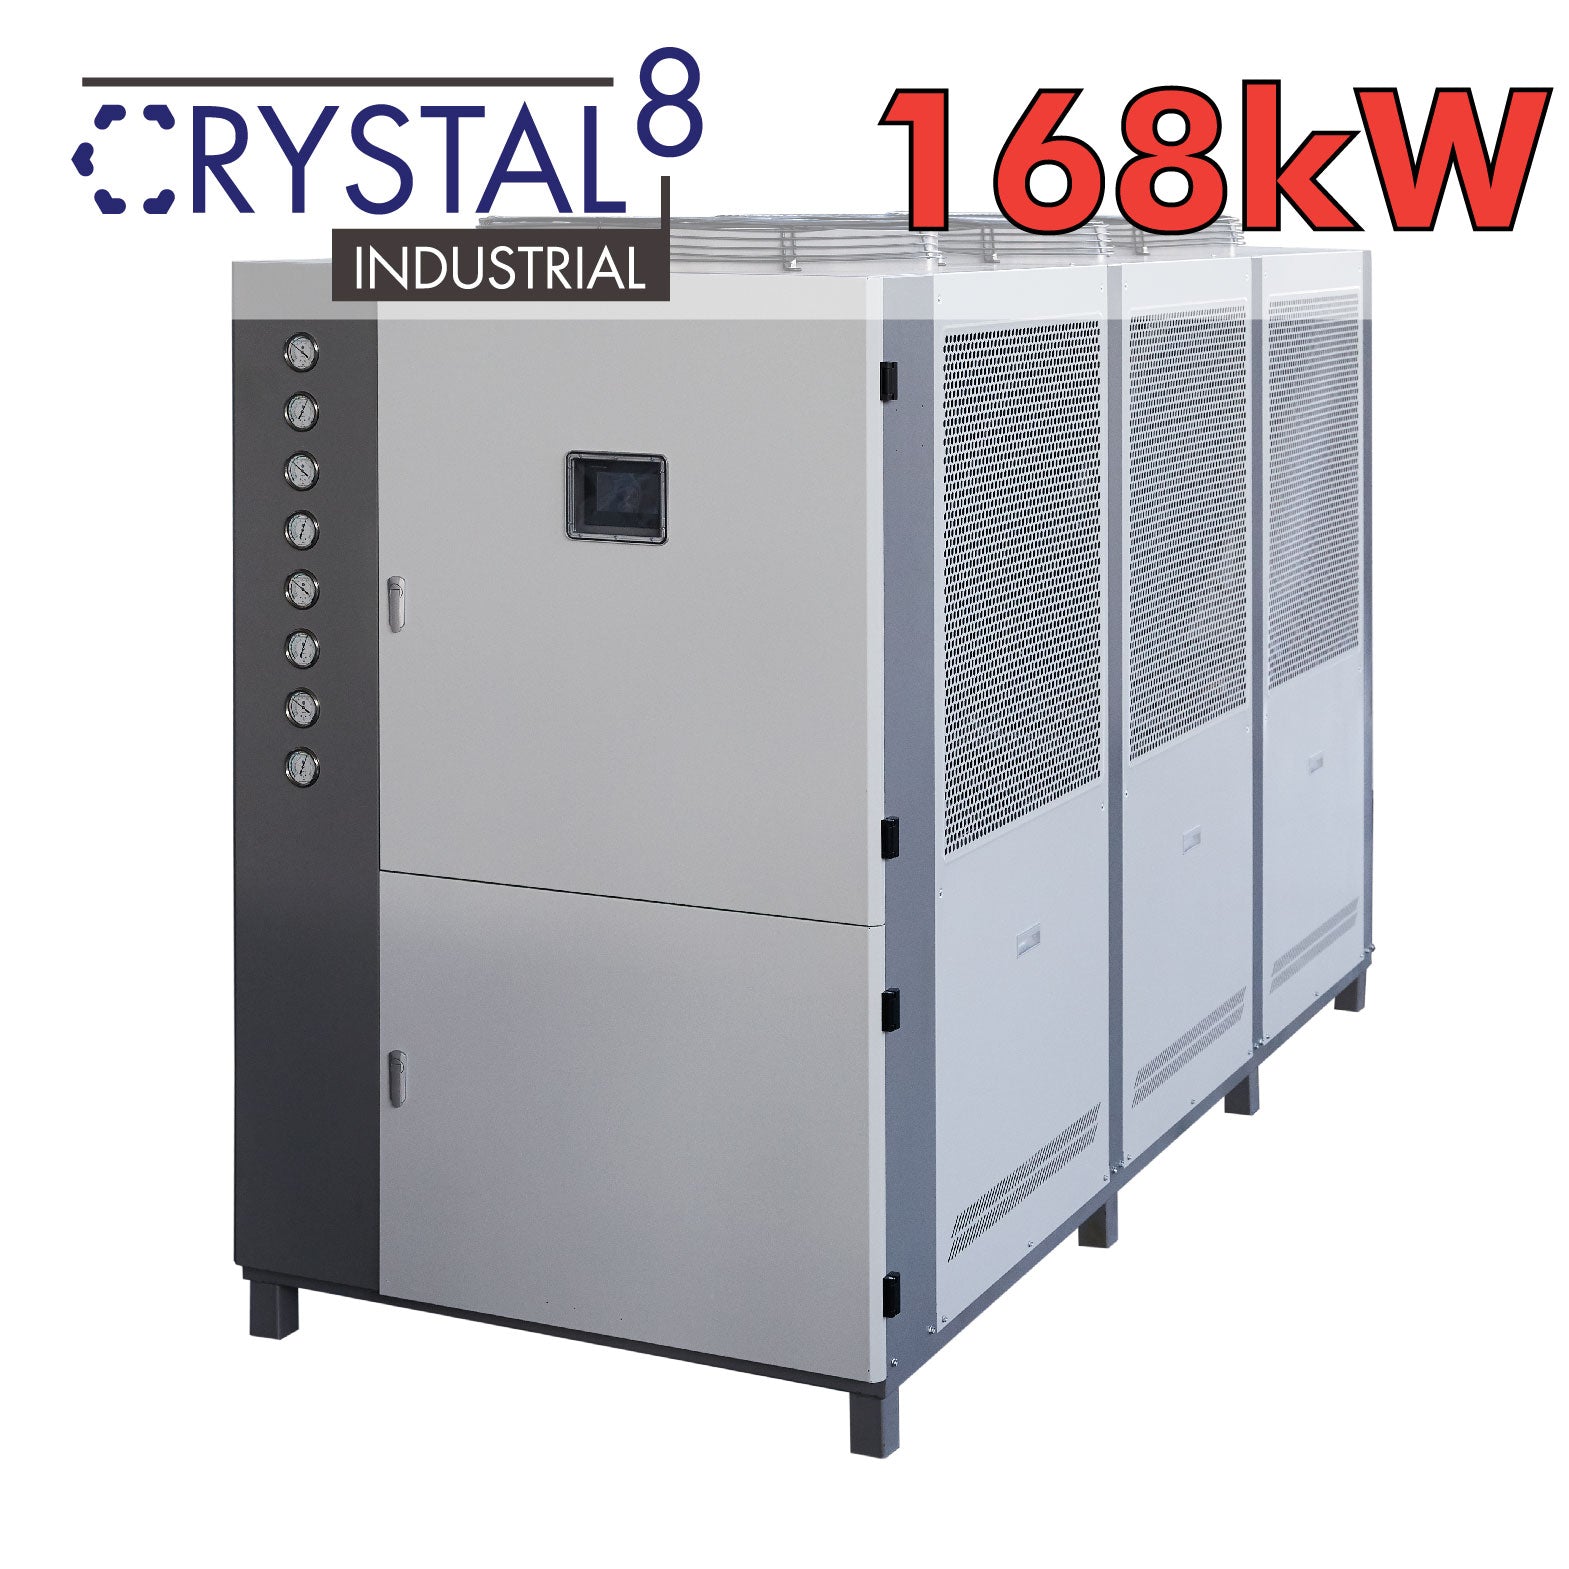 Compact and powerful 168kW Glycol Chiller.